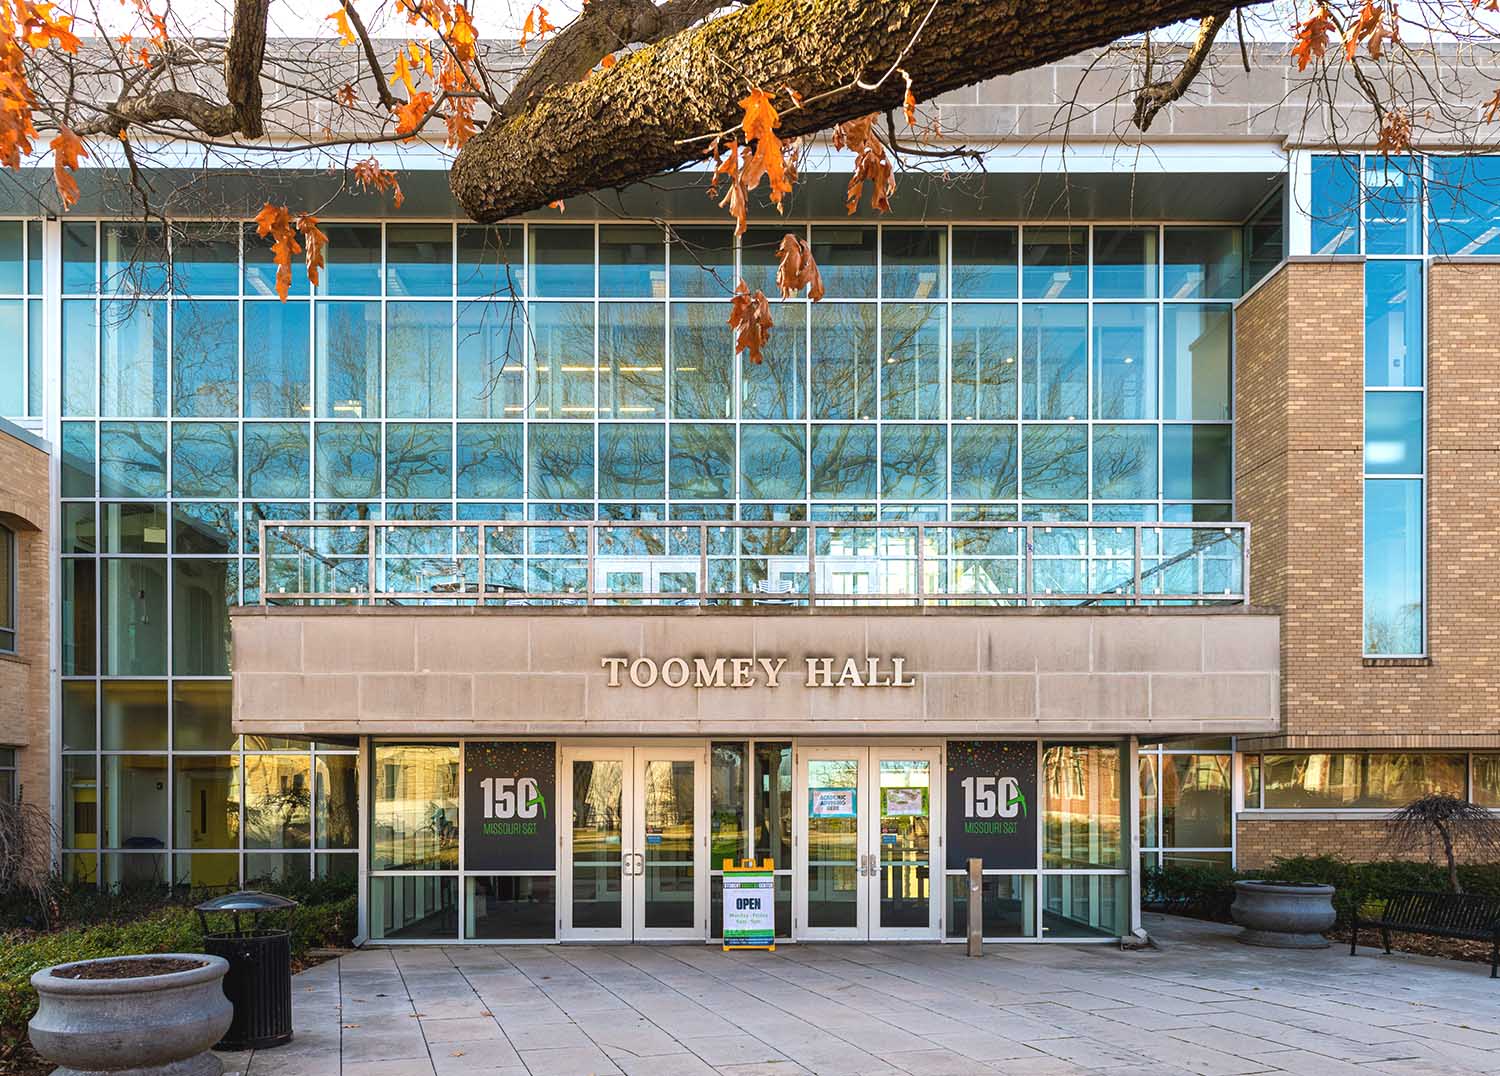 Front of building with glass windows and doors. 150 branded decals on the left and right of doors. Tree branch with orange leafs at the top.